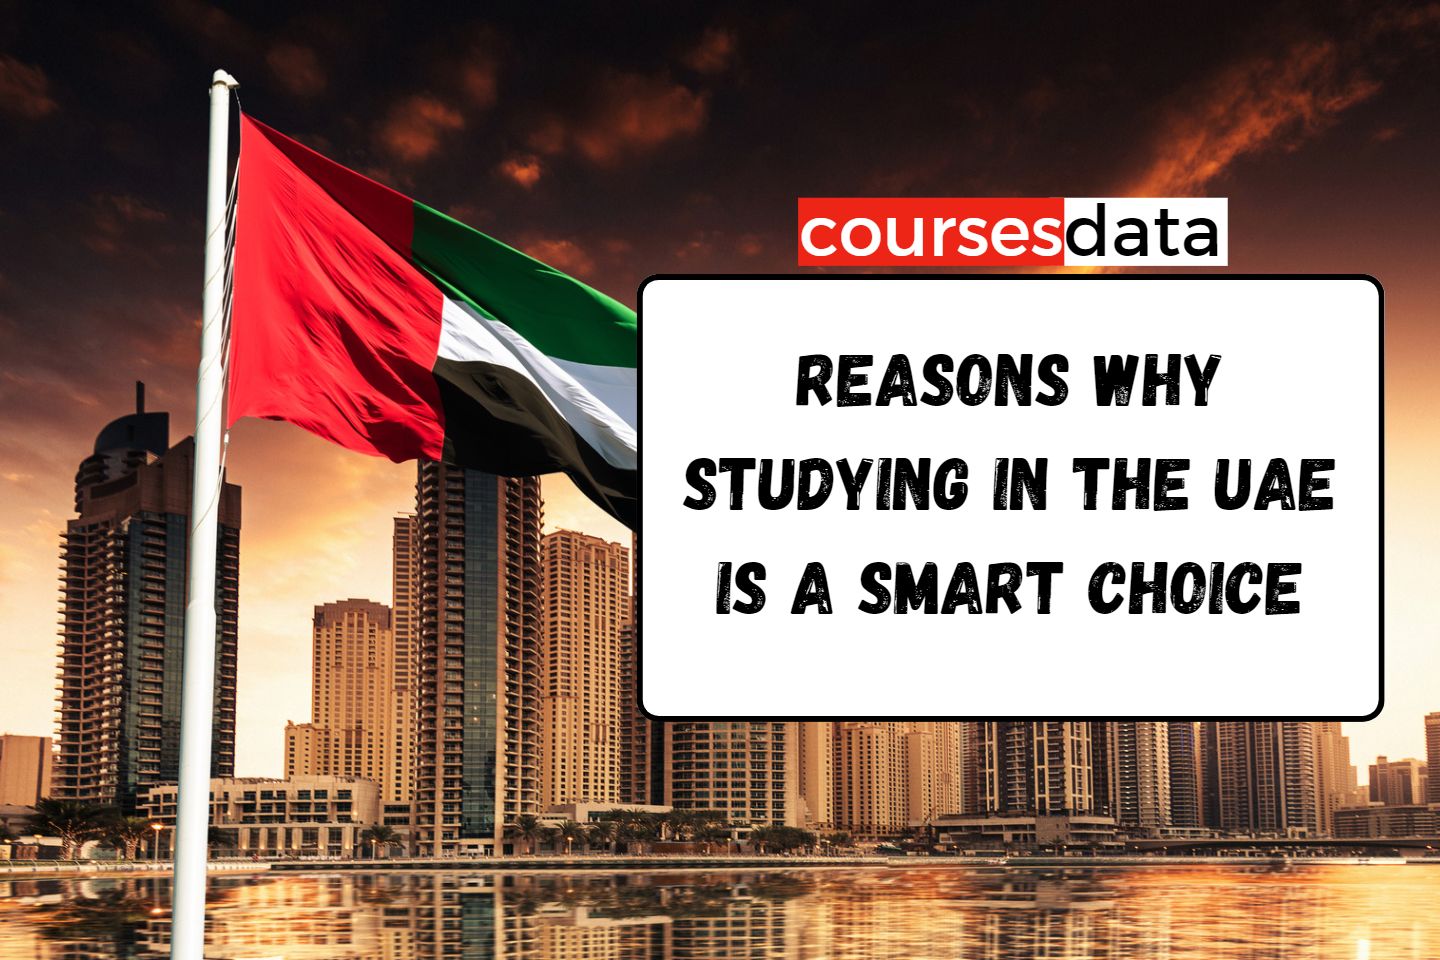 Short Reasons Why Studying in the UAE is a Smart Choice